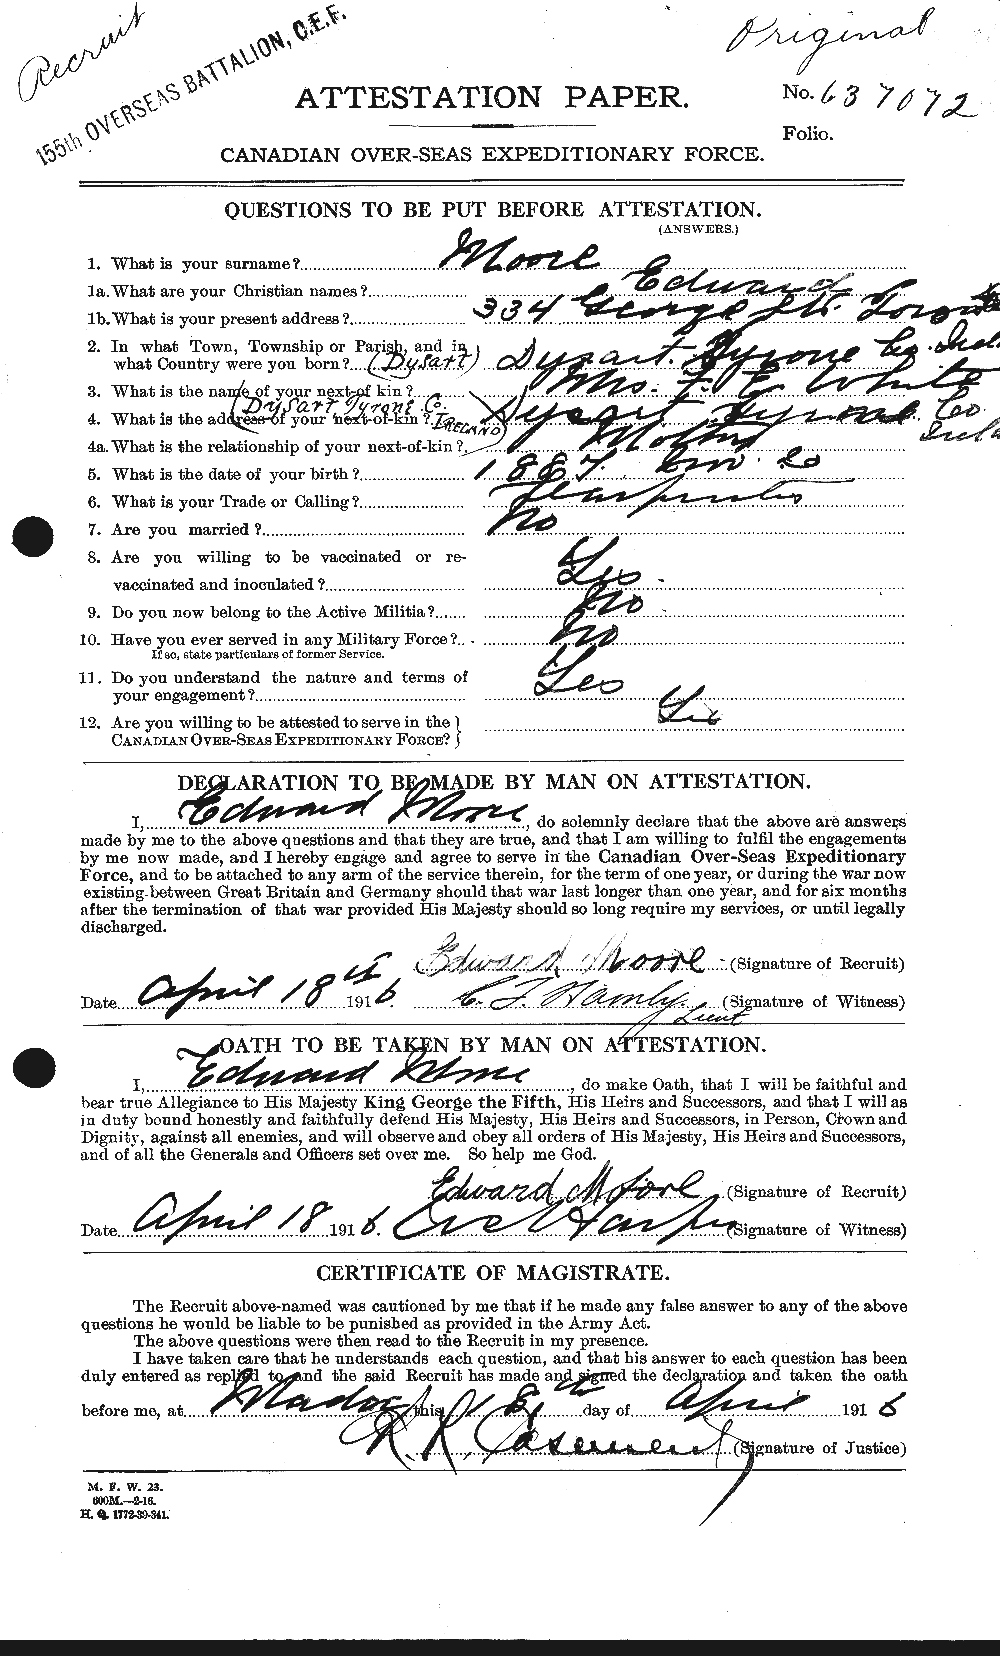 Personnel Records of the First World War - CEF 506614a